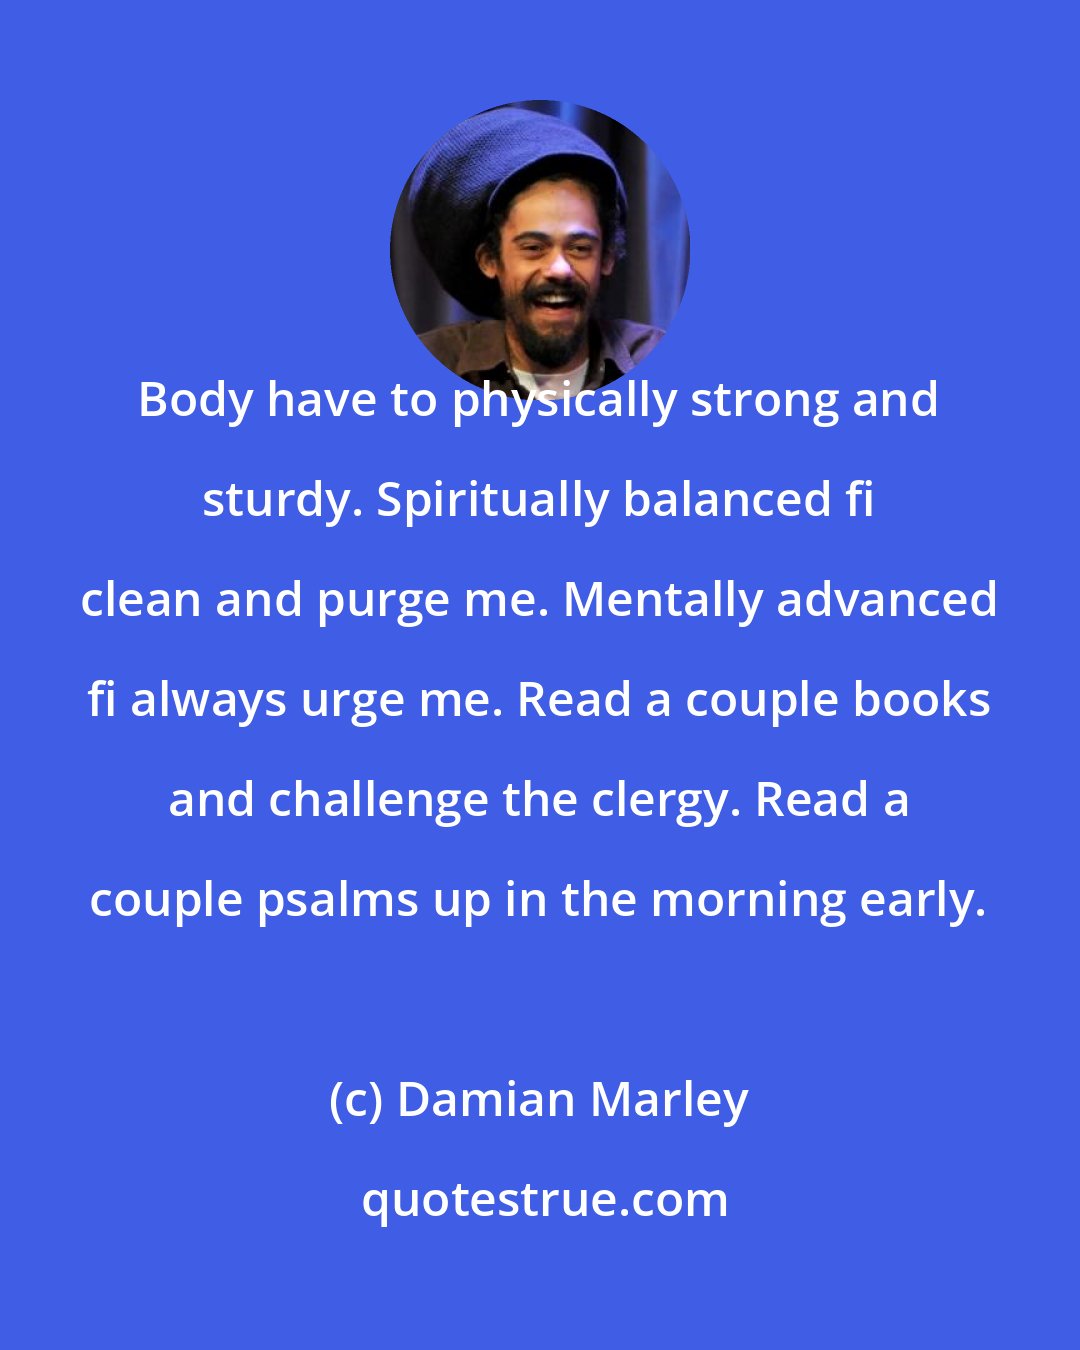 Damian Marley: Body have to physically strong and sturdy. Spiritually balanced fi clean and purge me. Mentally advanced fi always urge me. Read a couple books and challenge the clergy. Read a couple psalms up in the morning early.